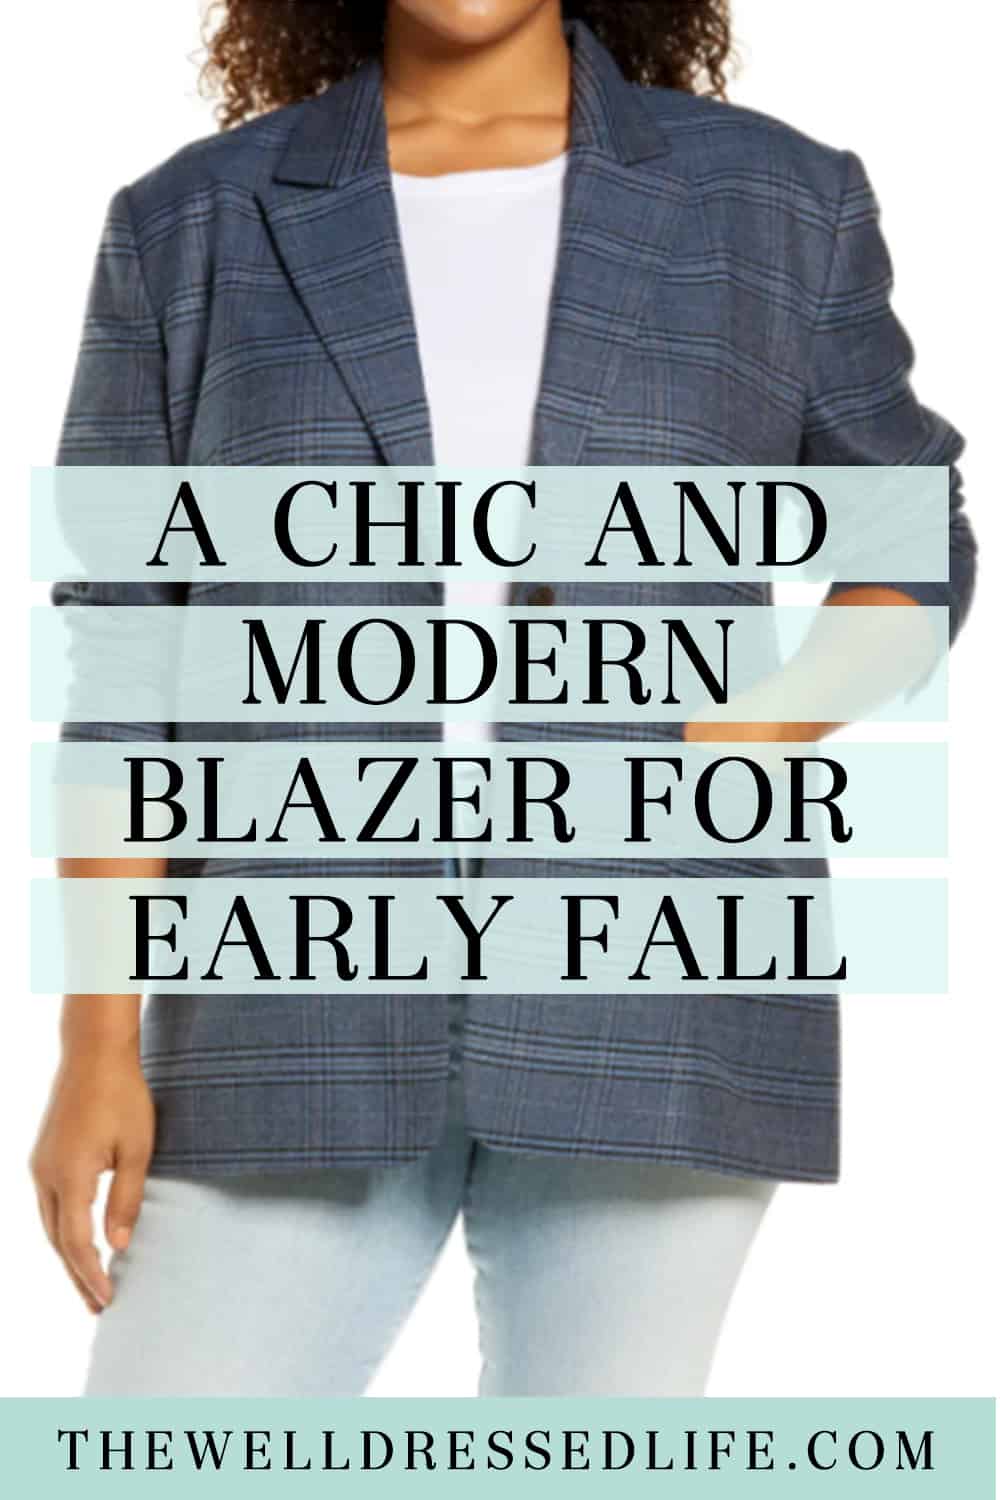 A Chic and Modern Blazer for Early Fall